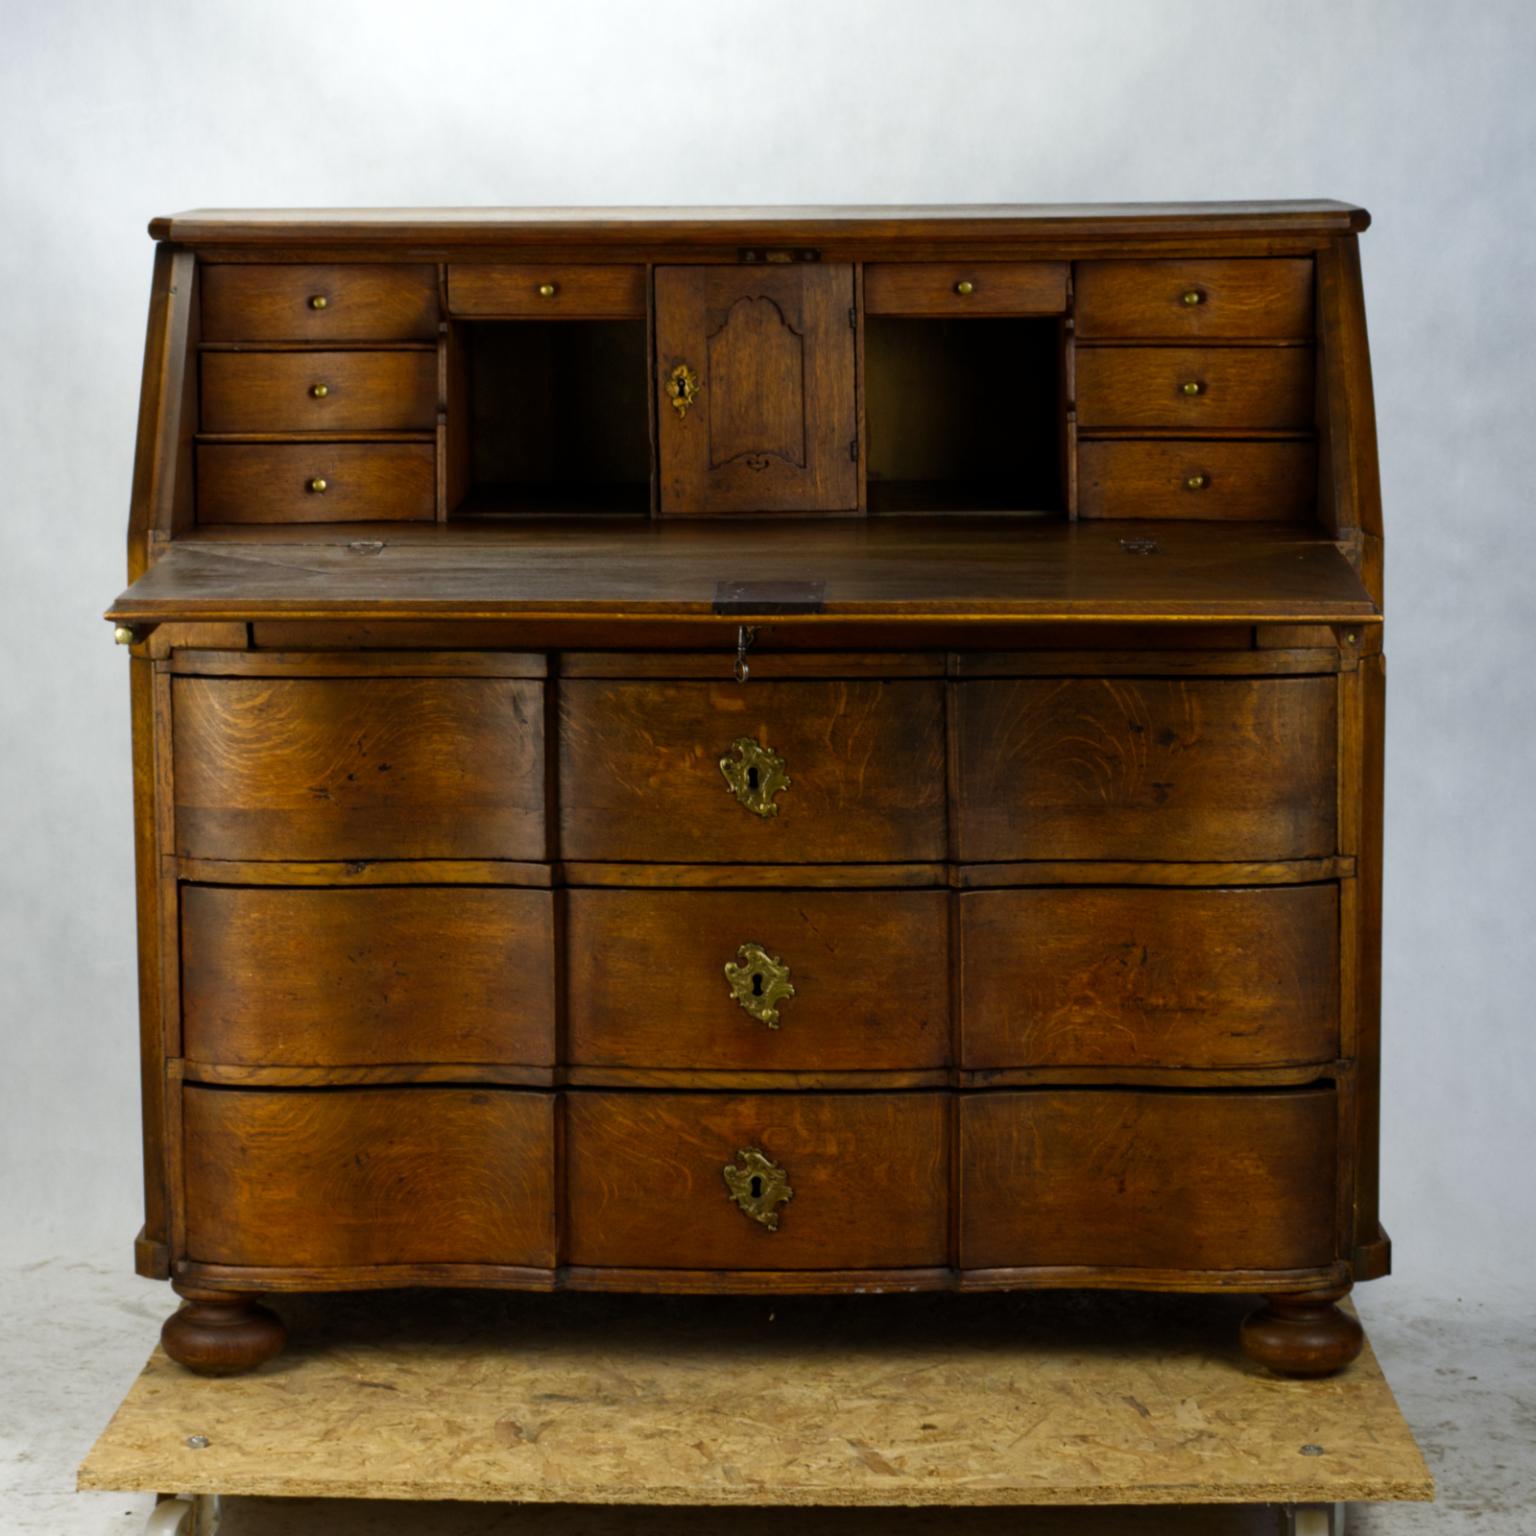 A Classic bureau in solid carved oakwood with three front profiled doors under a gorgeous secretary and writing desk from the late 18th or early 19th century. The whole chest of drawers, including drawers, is made of solid oak.
Exceptional quality